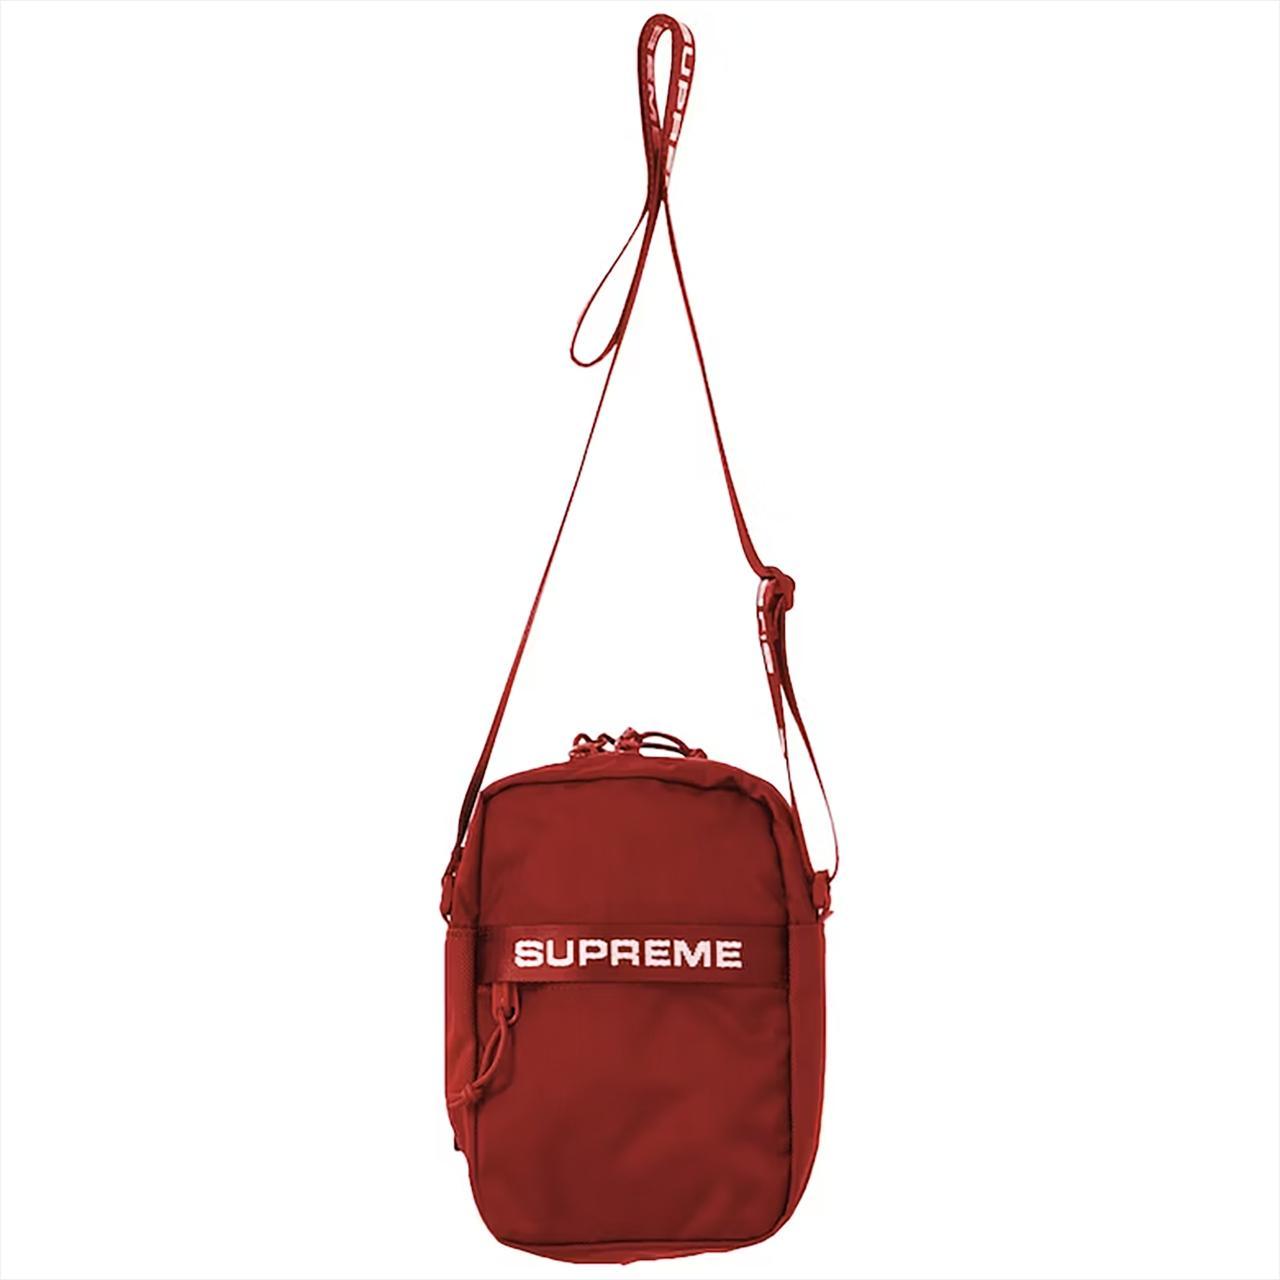 New #supreme shoulder bags available in store! Come “Shop & get